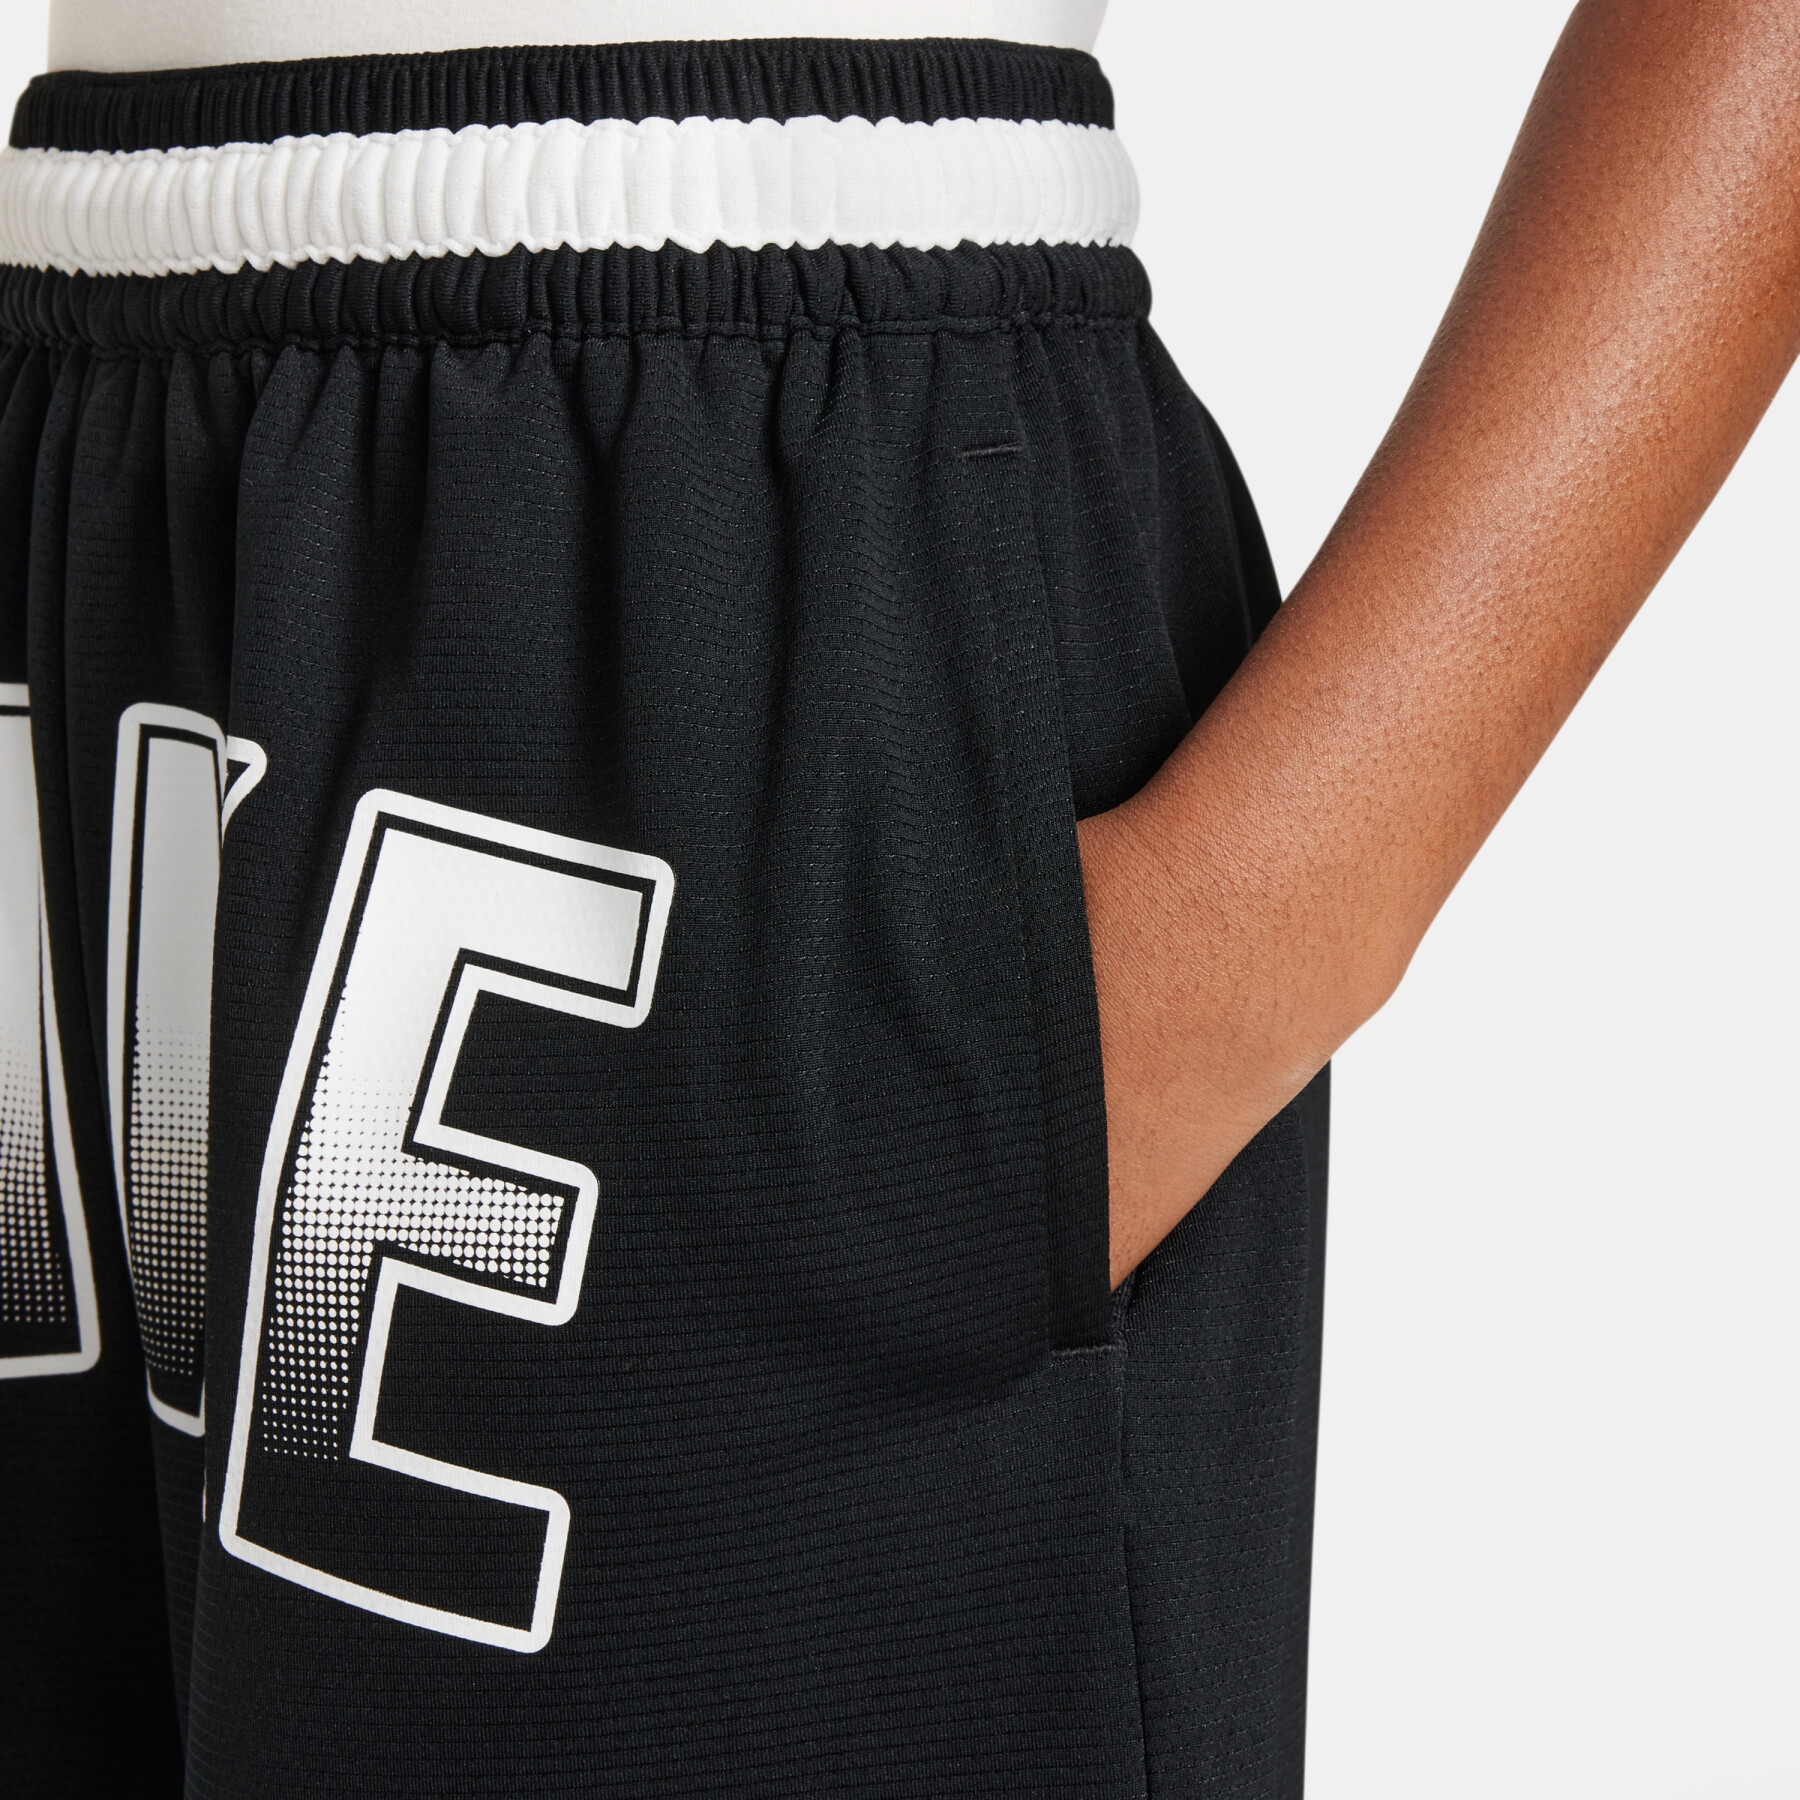 Children's shorts Nike DNA Culture of Basketball